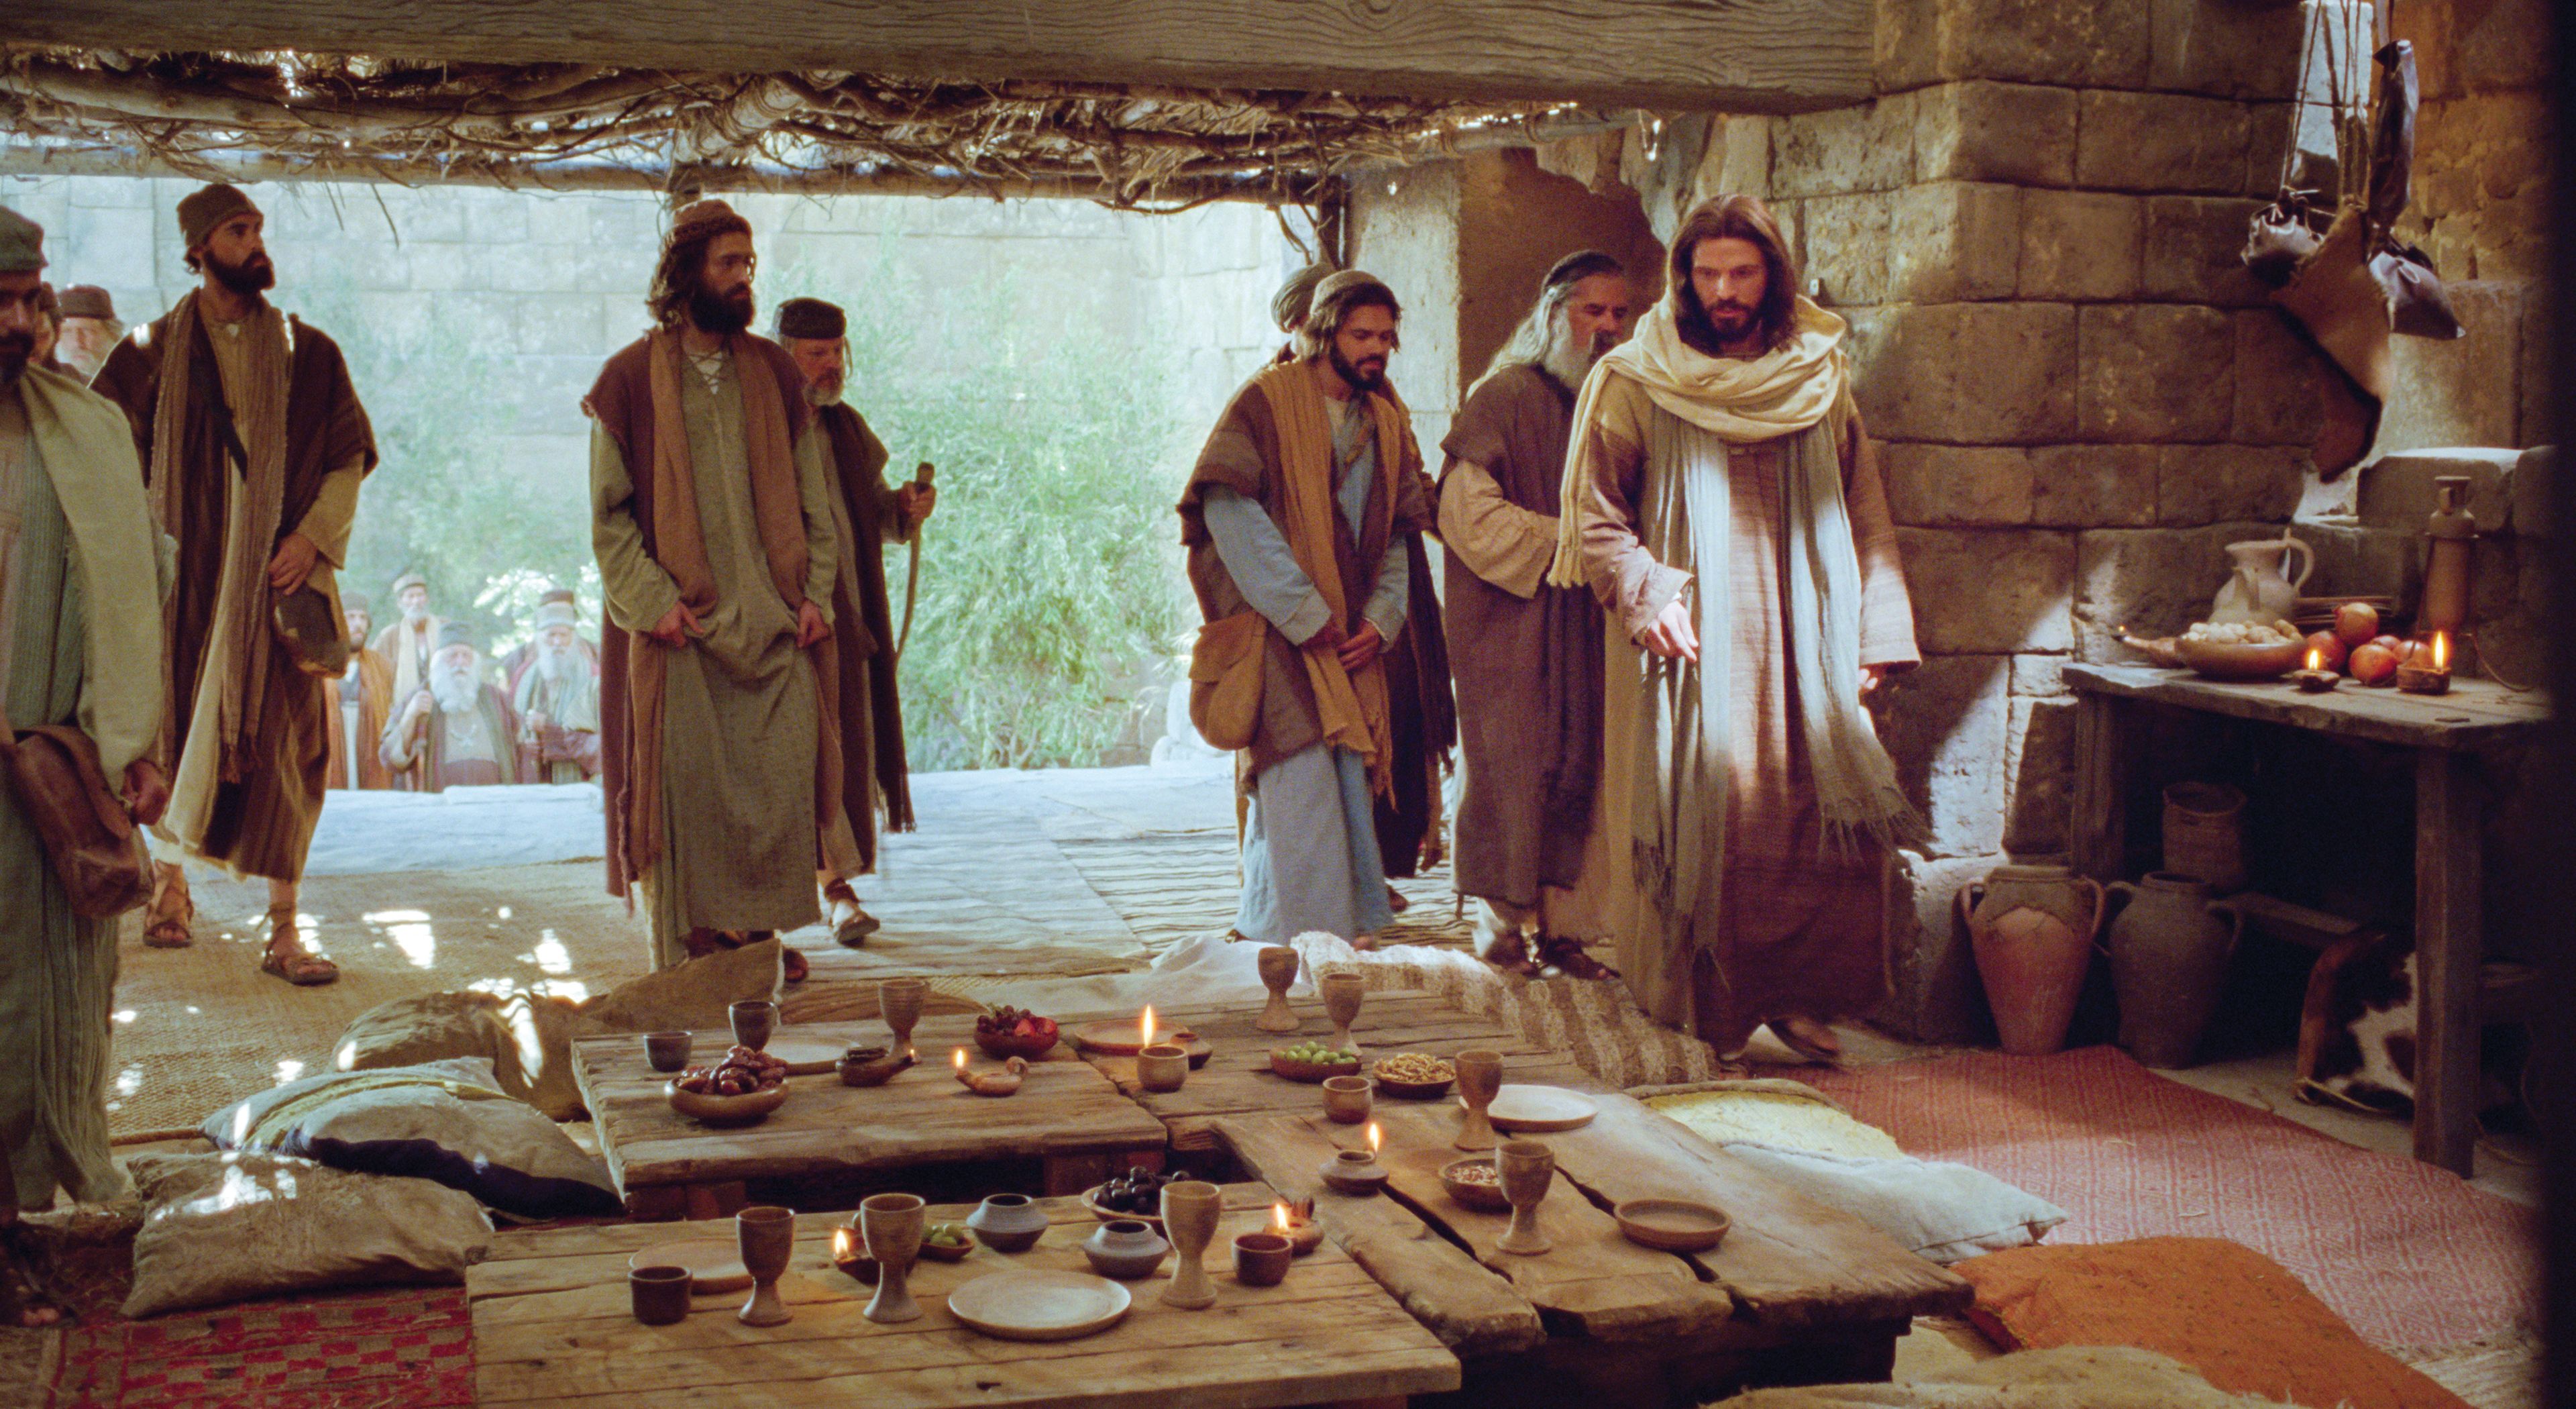 Jesus and His disciples prepare for a meal and to be taught.